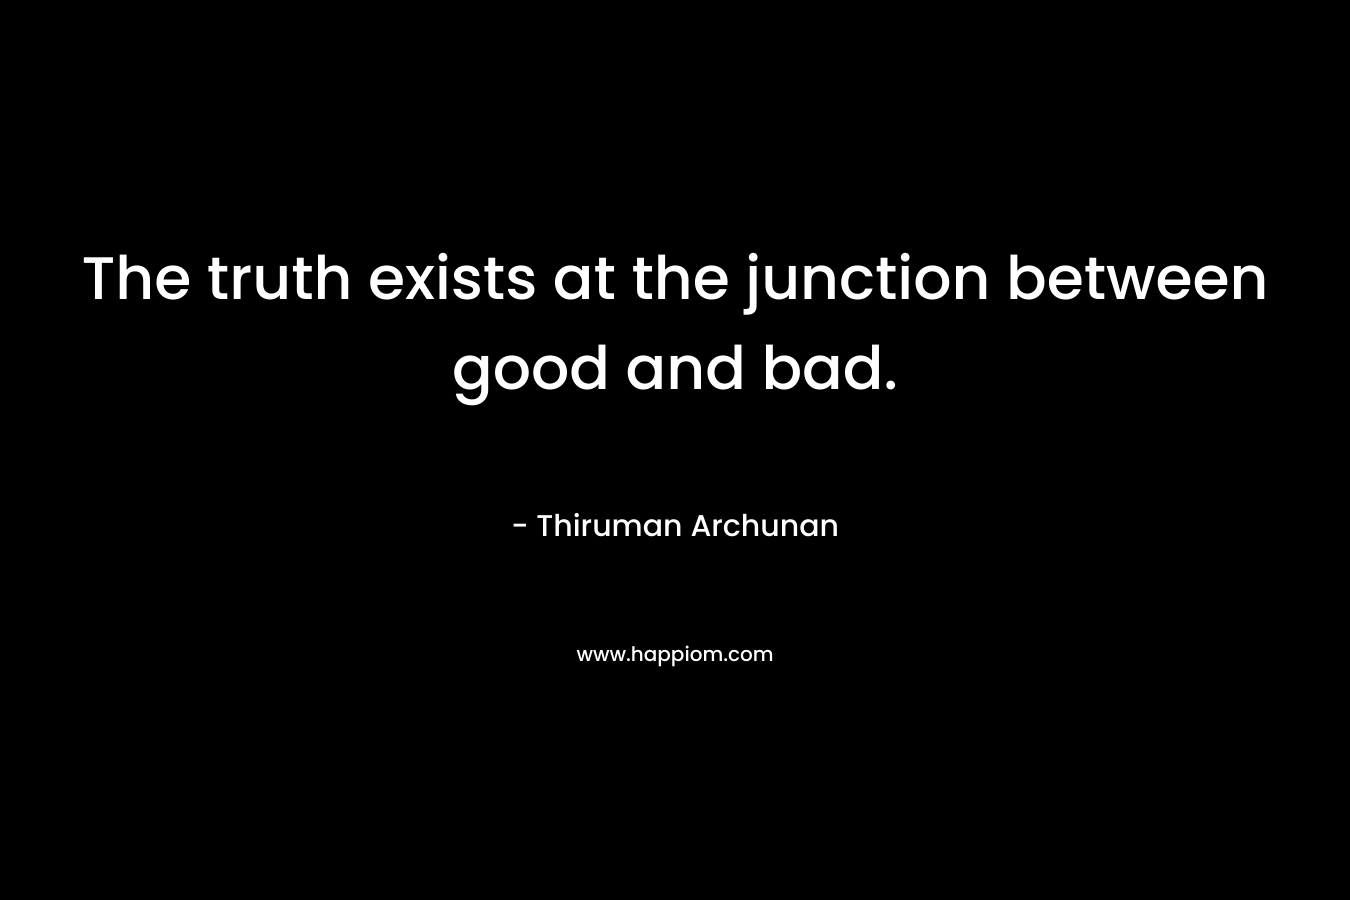 The truth exists at the junction between good and bad.